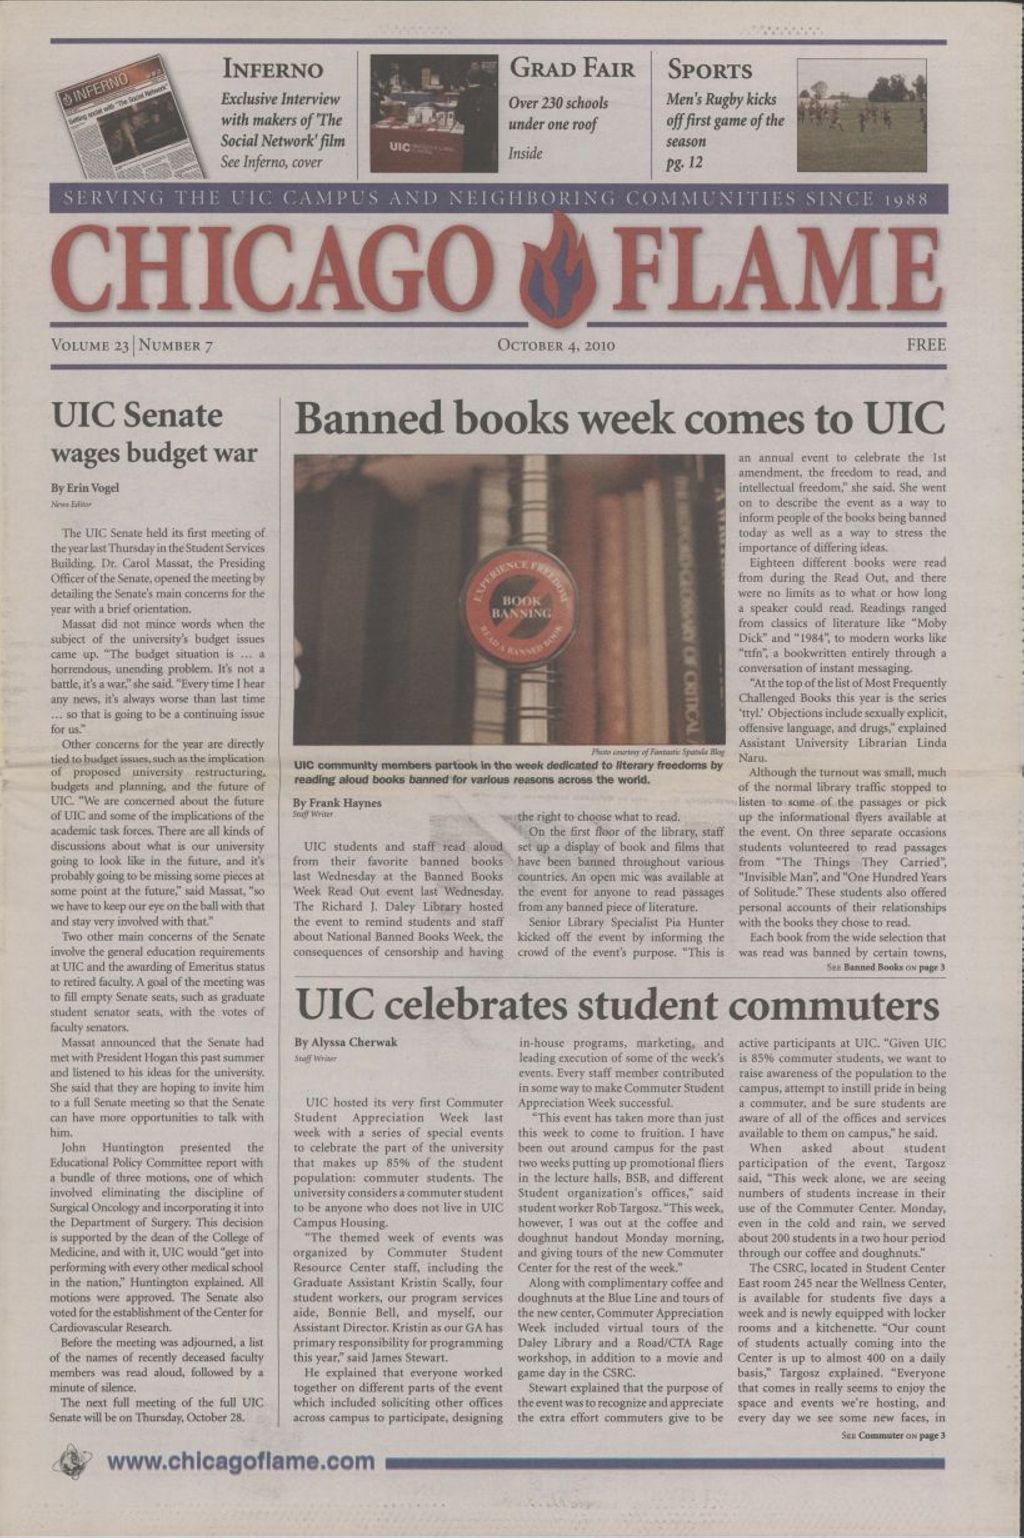 Chicago Flame (October 4, 2010)